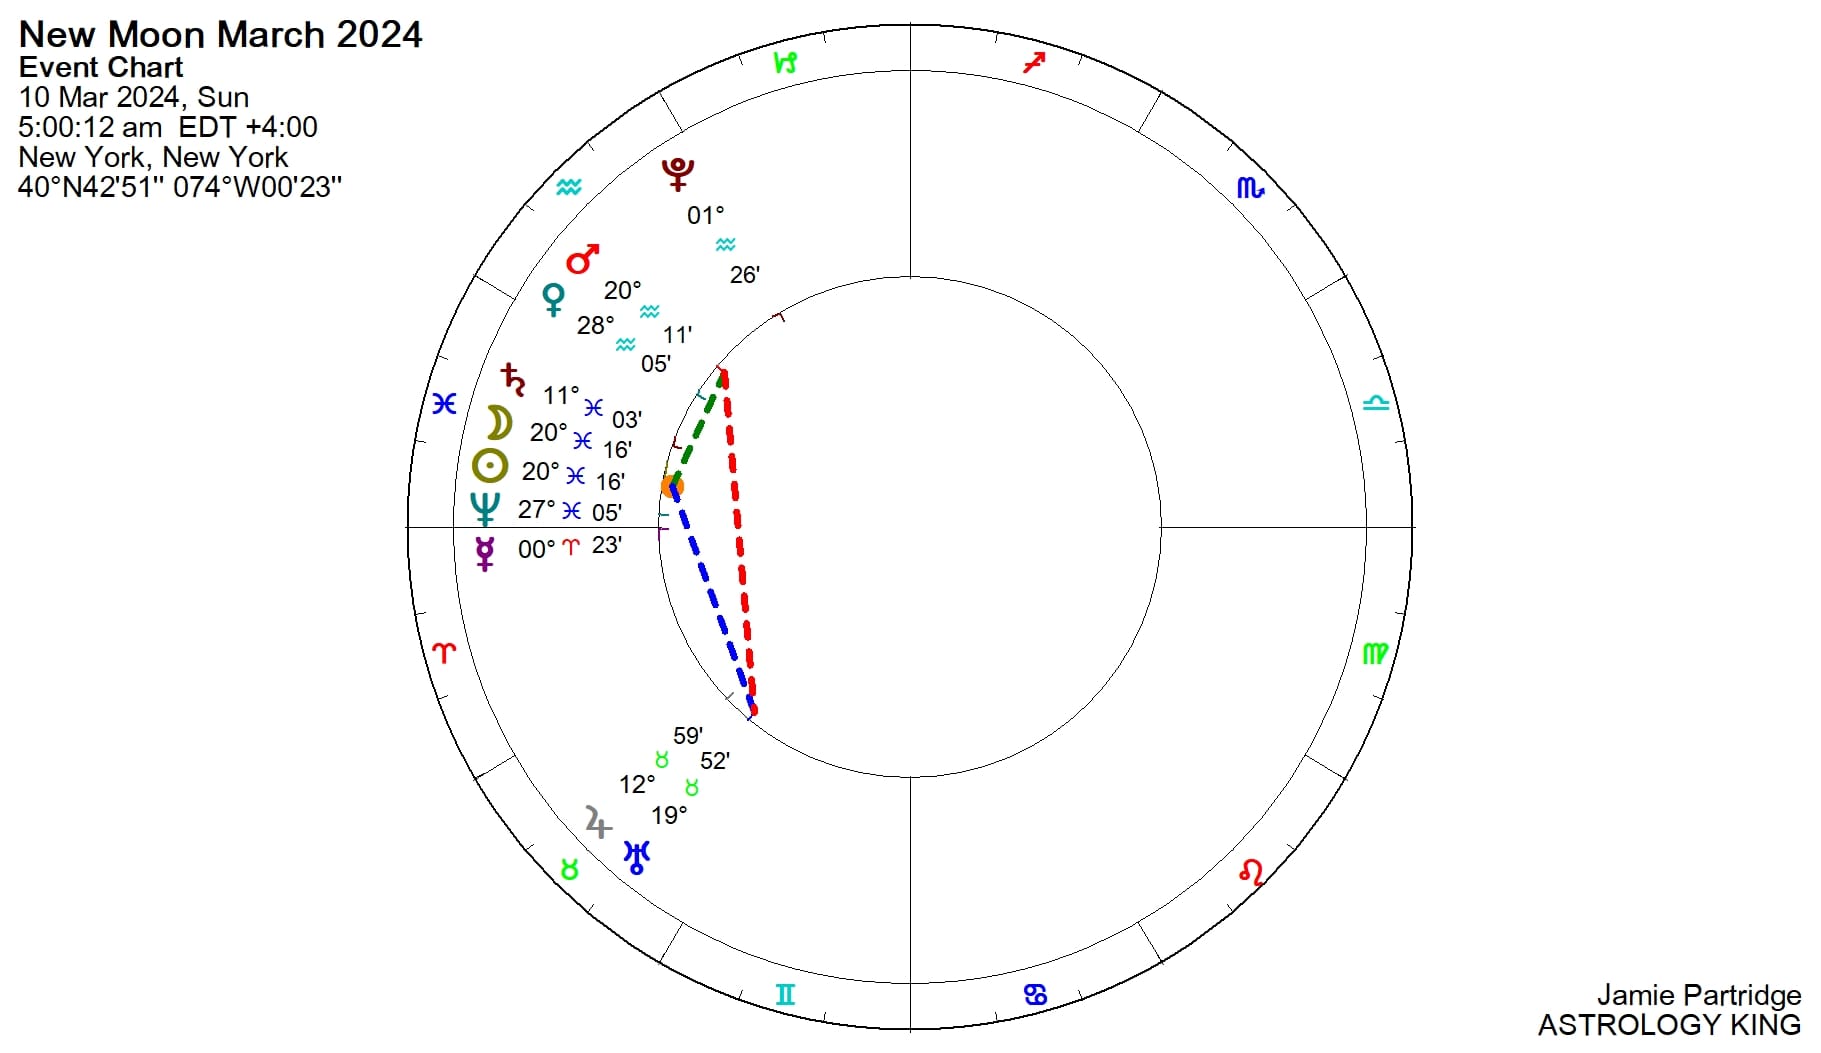 New Moon March 2024 in Pisces Astrology King